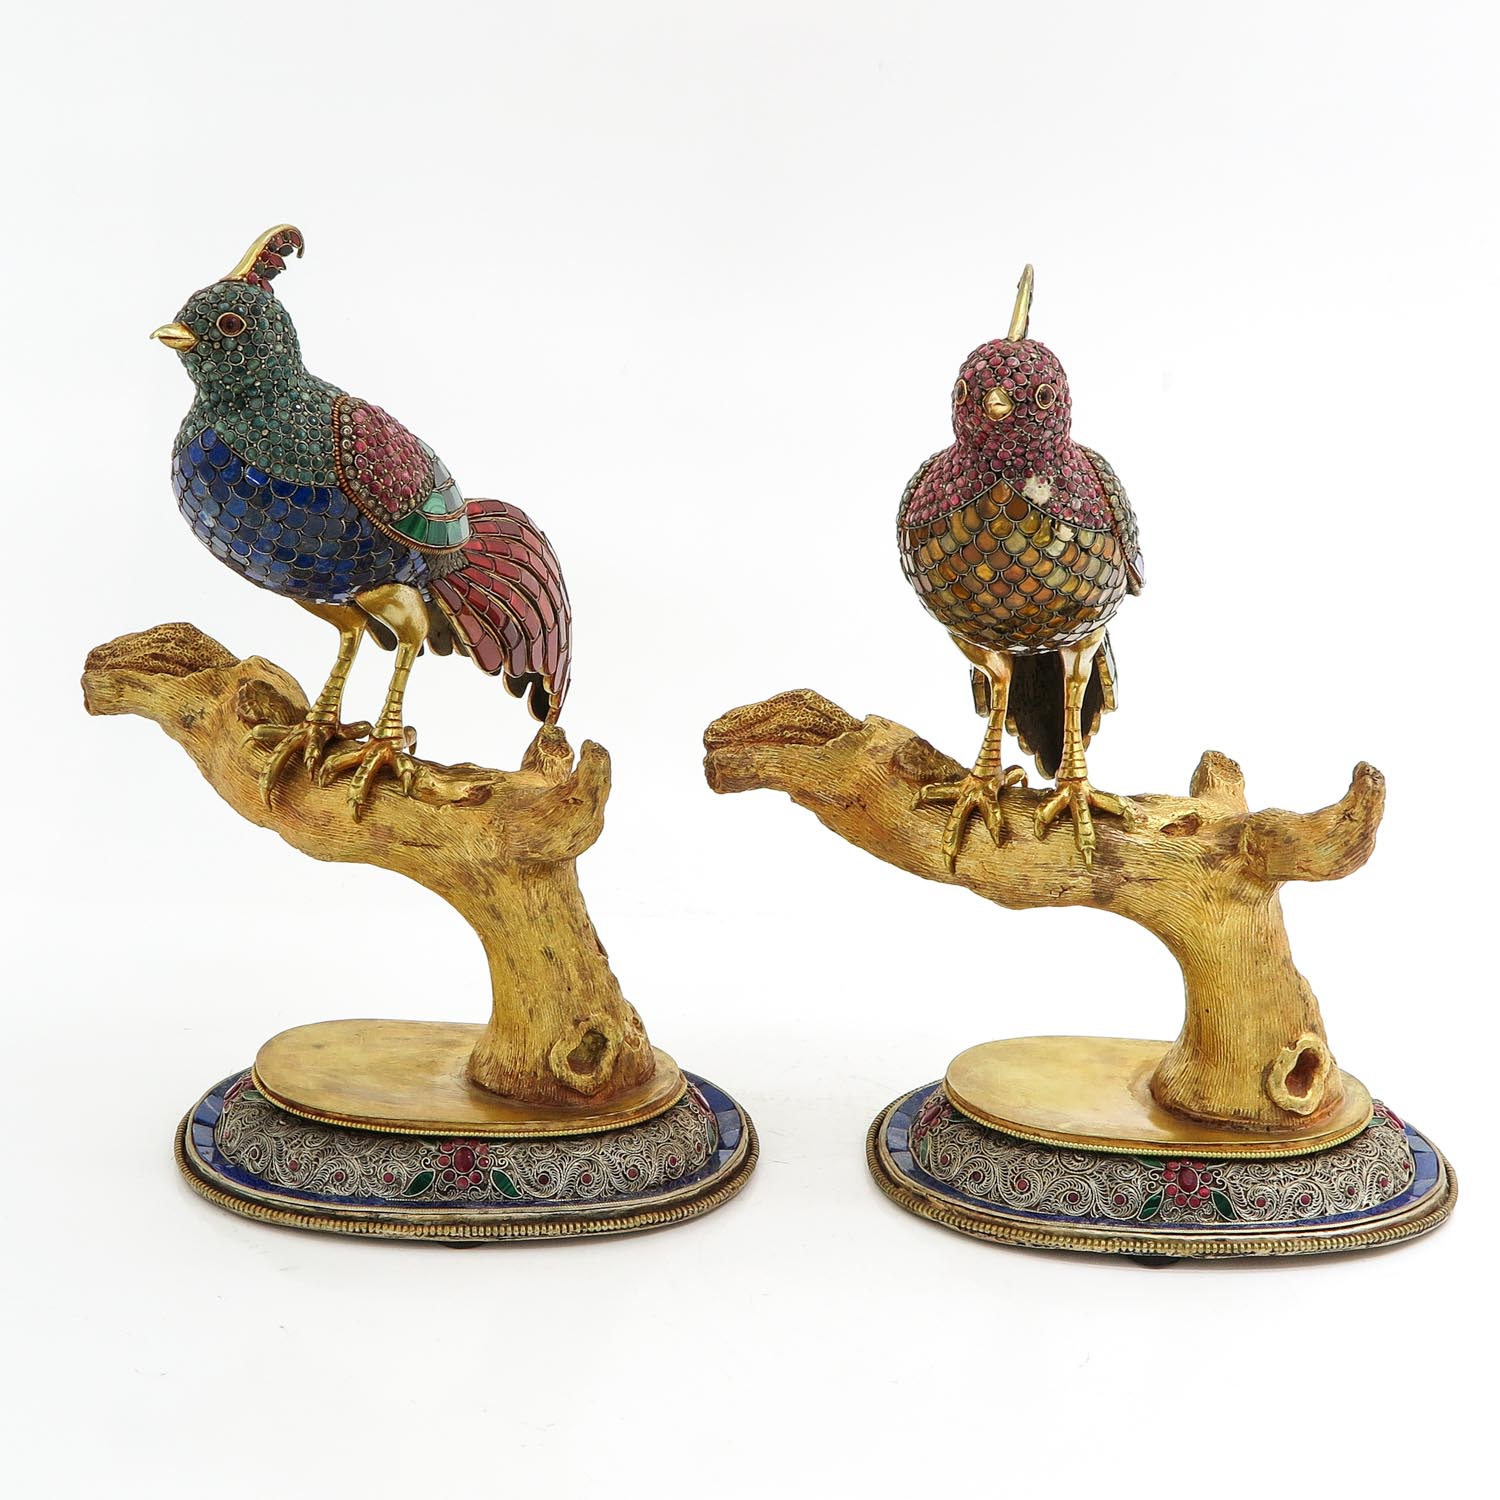 A Pair of Silver and Gemstone Bird Sculptures